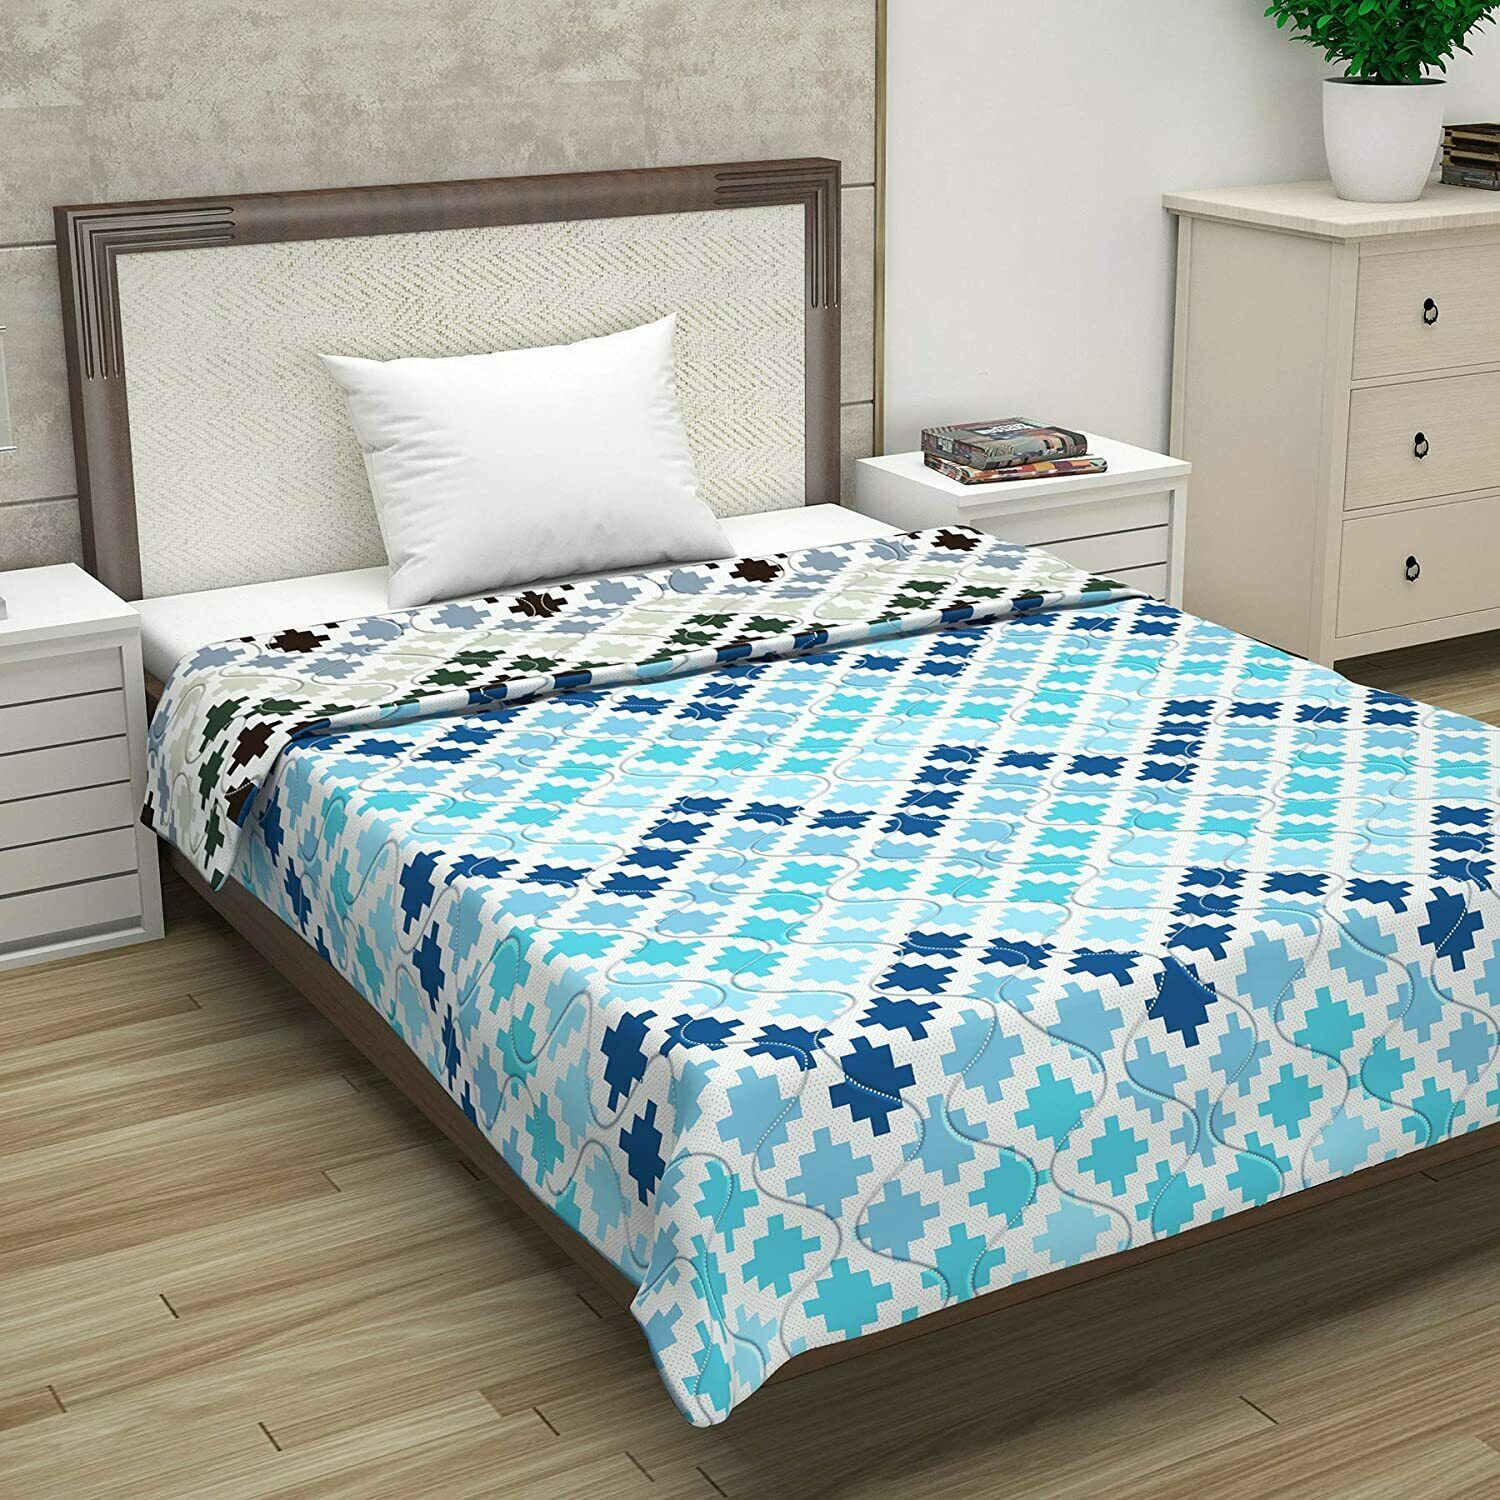 Single Size Reversible Printed Comforter for AC & Mild Winter, Sky Blue& Brown